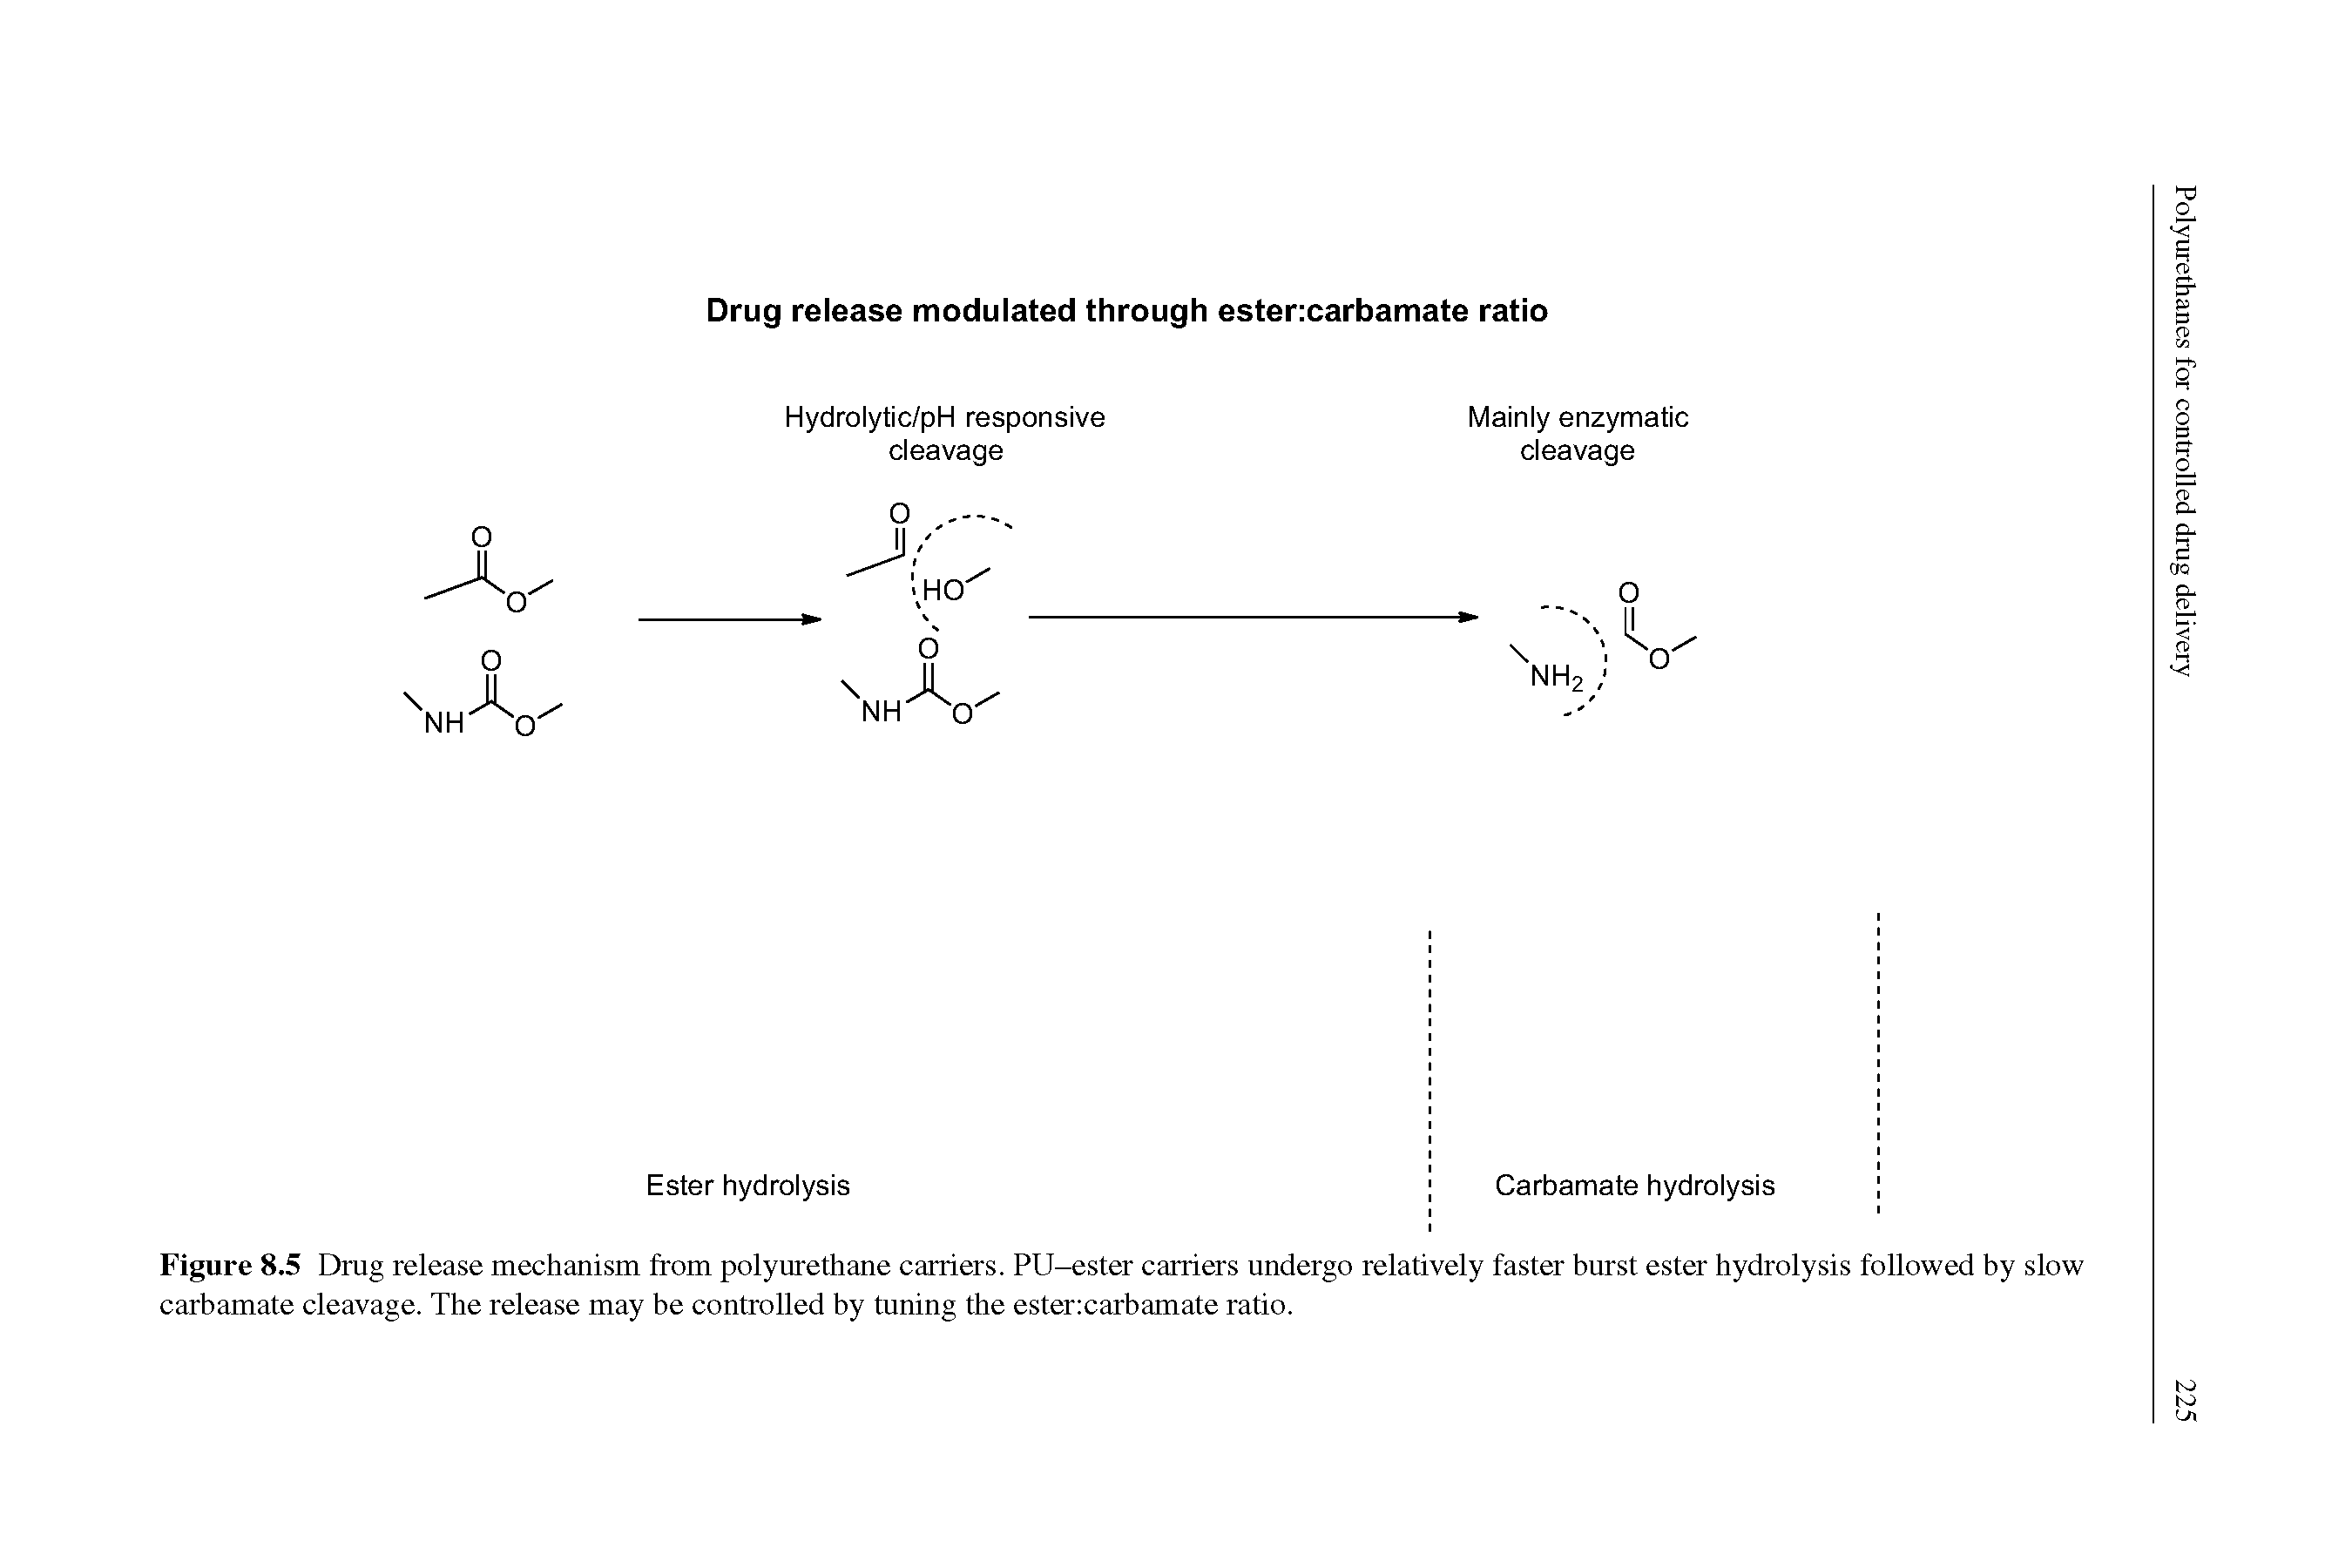 Figure 8.5 Drug release mechanism from polyurethane carriers. PU-ester carriers undergo relatively faster burst ester hydrolysis followed by slow carbamate cleavage. The release may be controlled by tuning the esterxarbamate ratio.